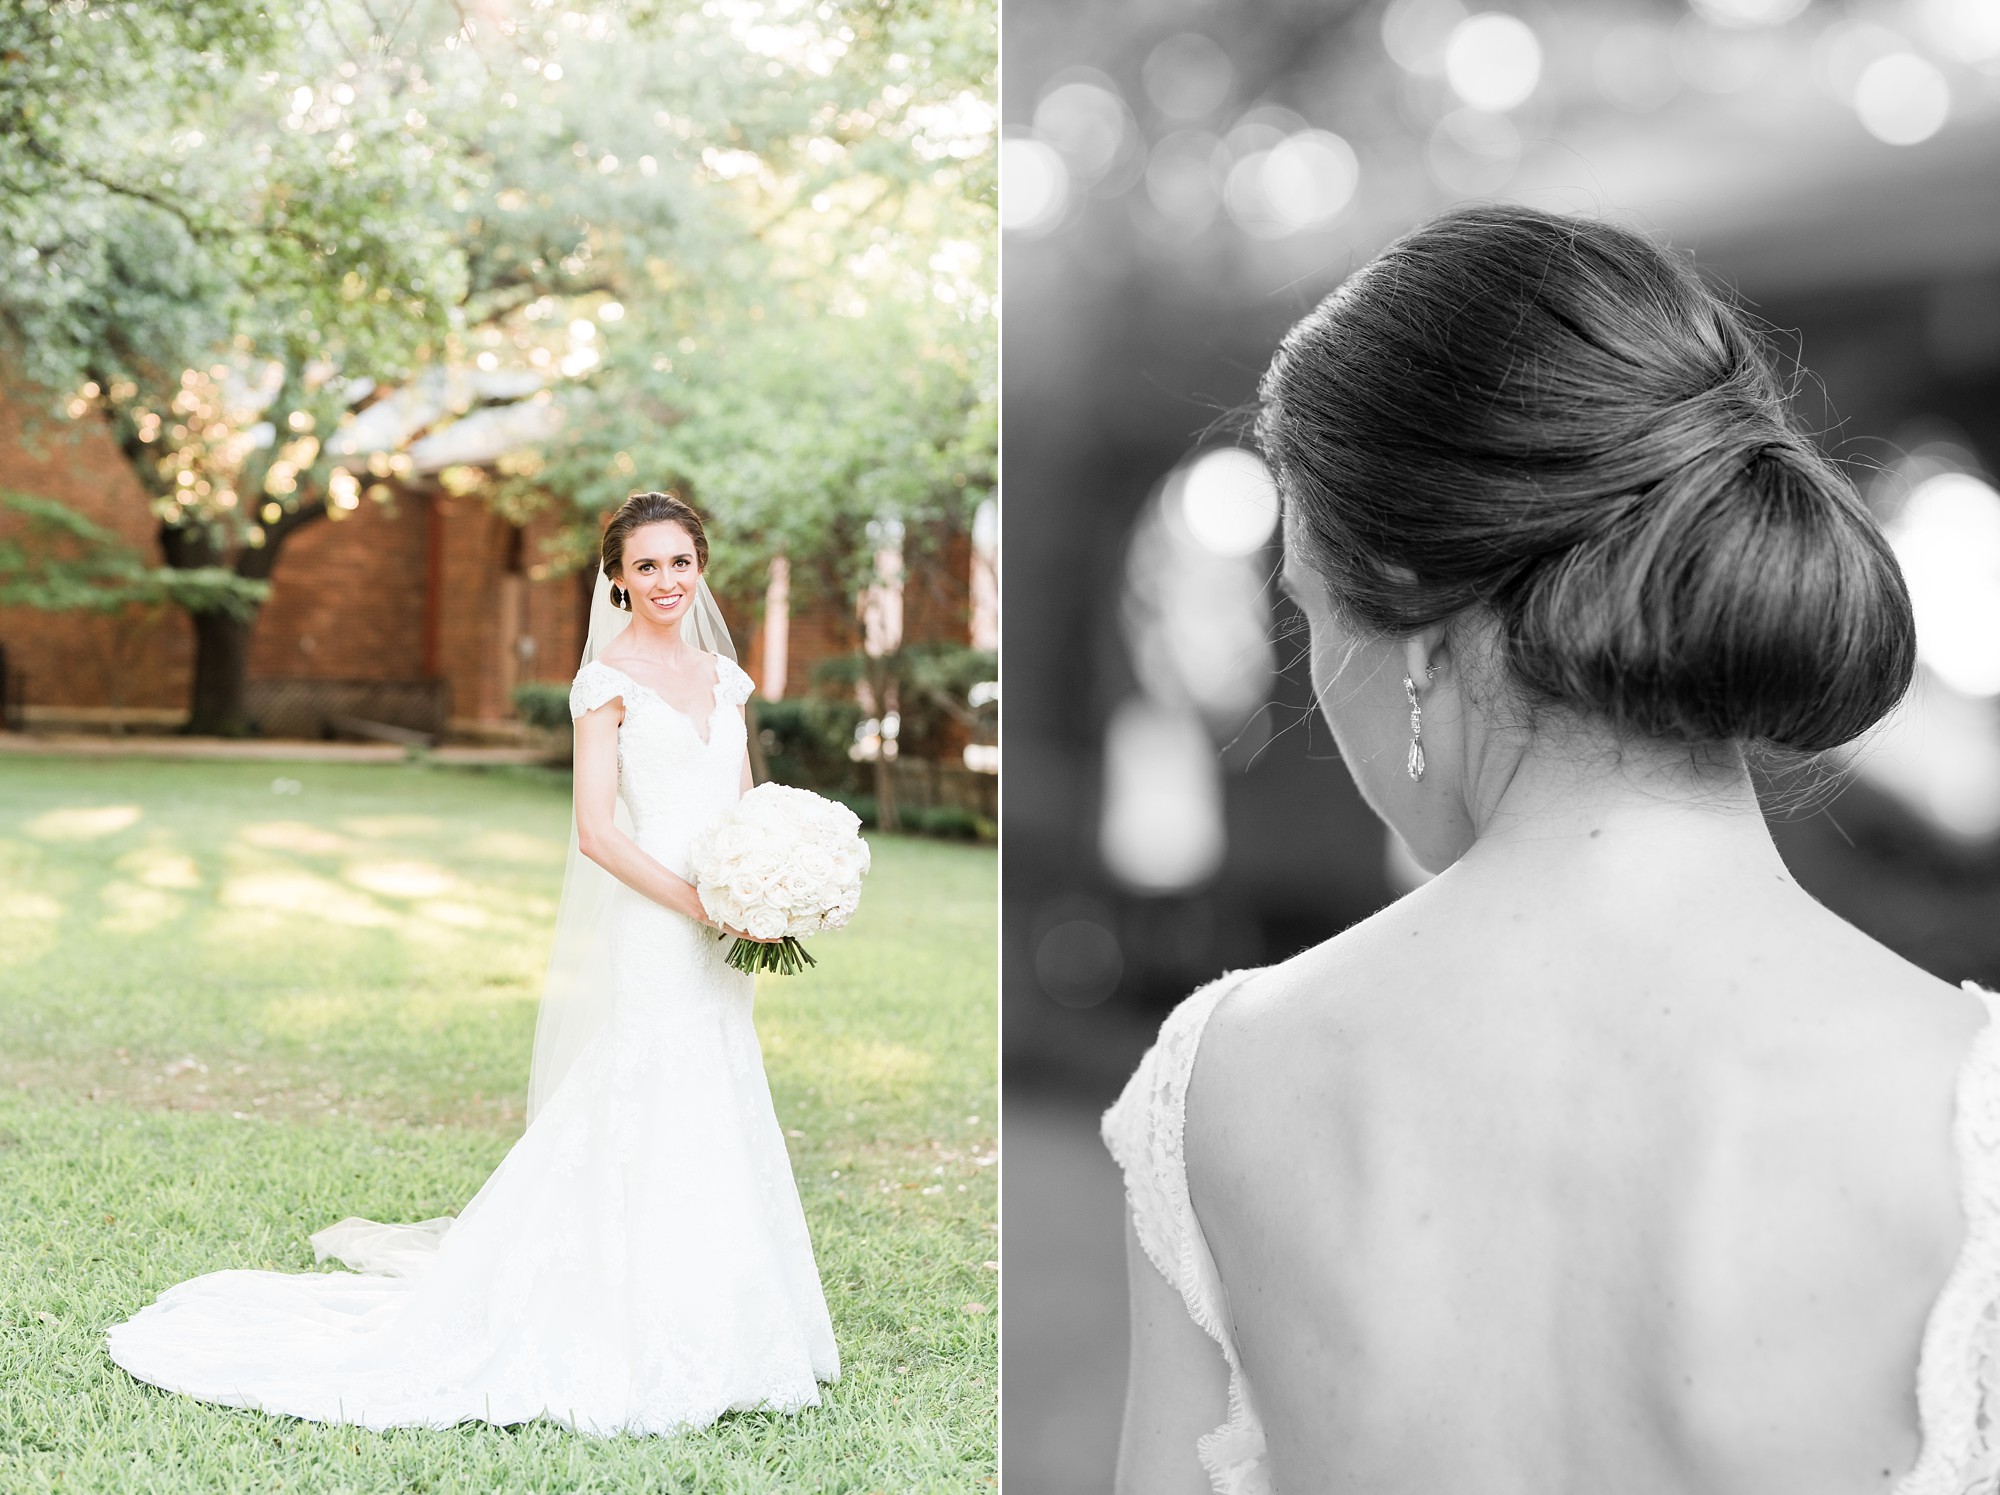 Elegant Wedding at The Room on Main in Dallas